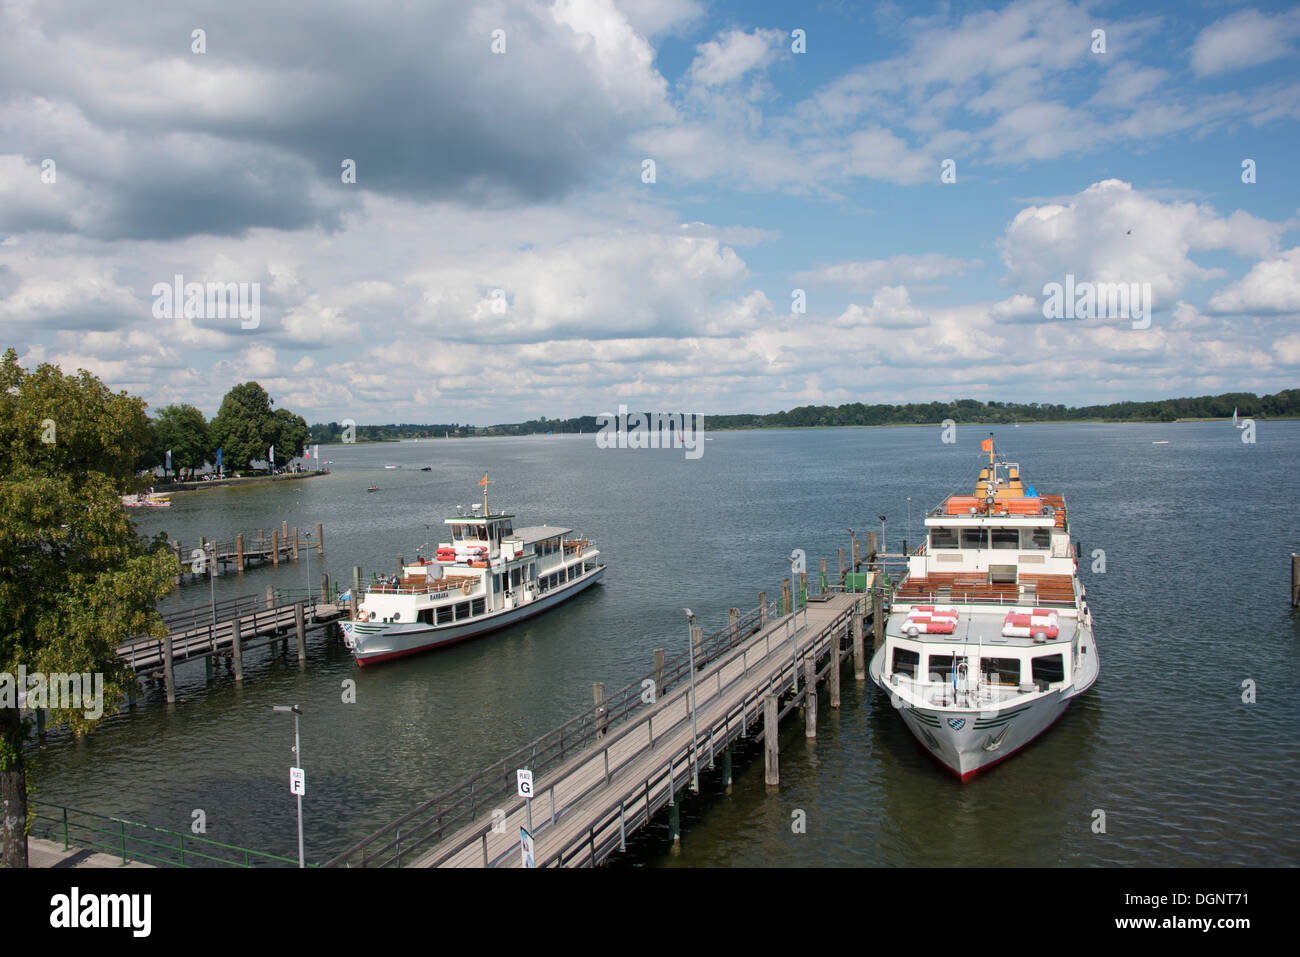 A steamboat at a landing stage on lake Chiemsee, Insel Herrenchiemsee, Prien am Chiemsee, Bavaria, Germany Stock Photo